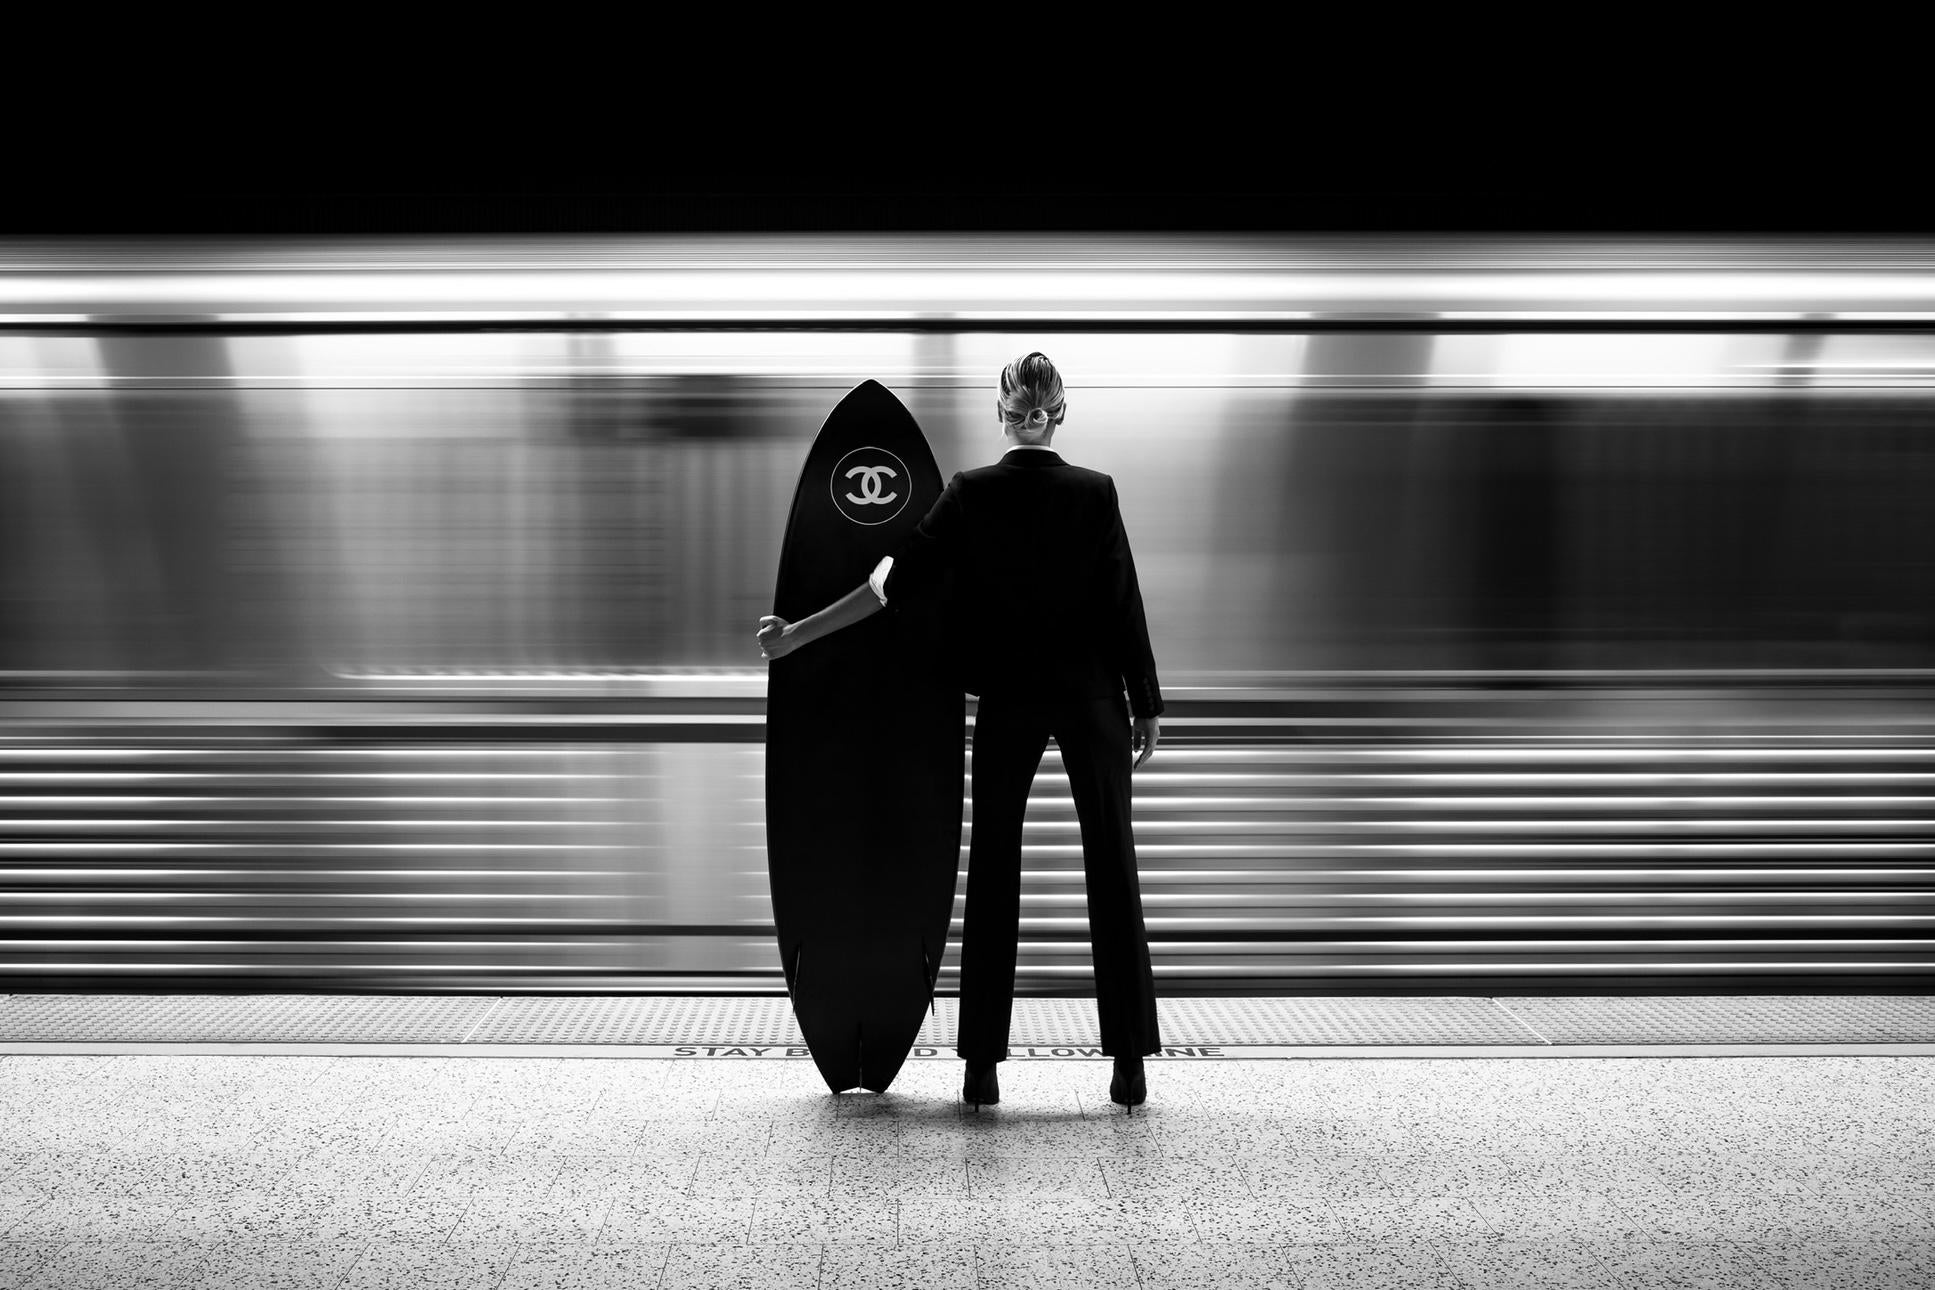 "Subway Surfer" Photography 16" x 42" inch Edition of 15 by Brendan North

ships rolled in a tube

ABOUT:
Brendan North is a fine art photographer based in Los Angeles. Having built a social media presence of nearly 1 million people, Brendan is one